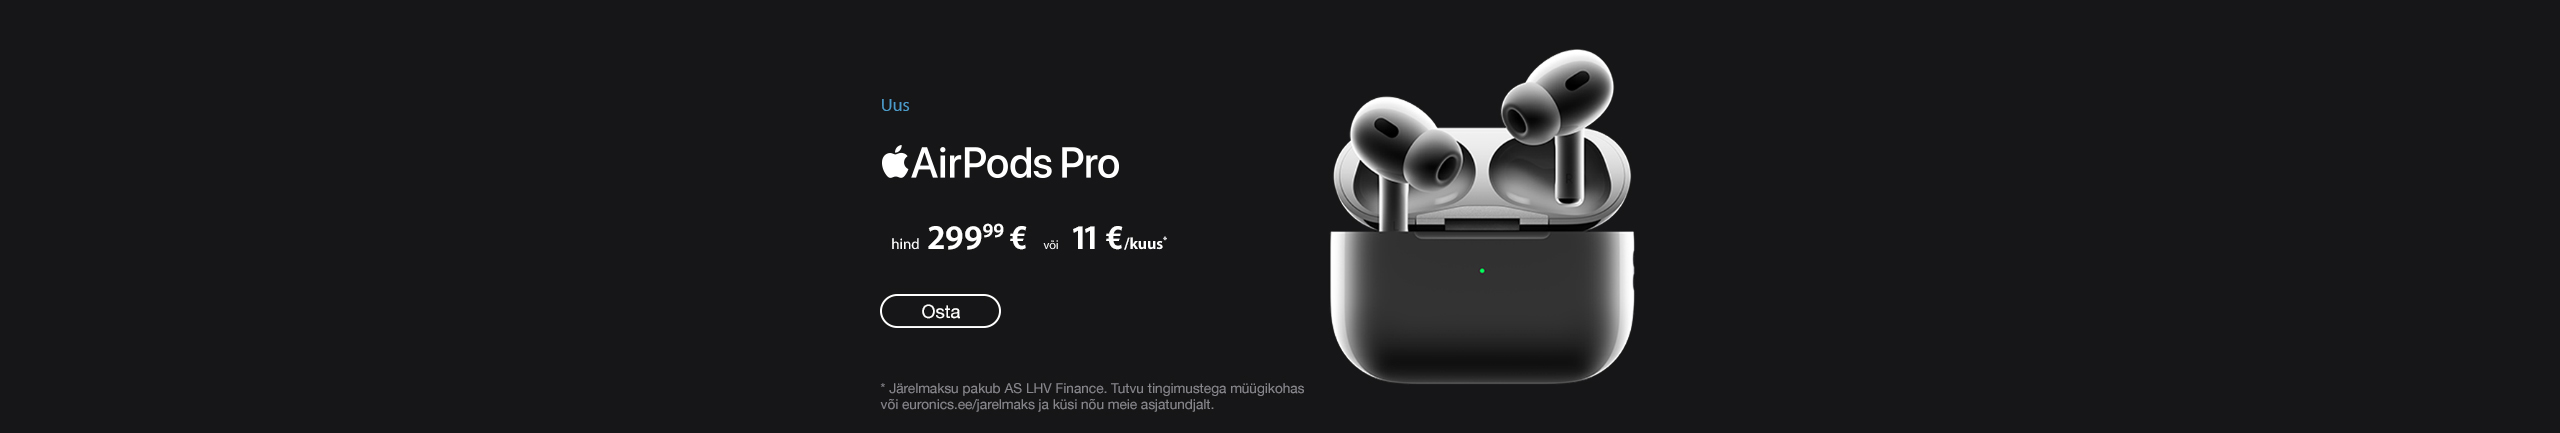 Apple AirPods Pro 2 Buy now!